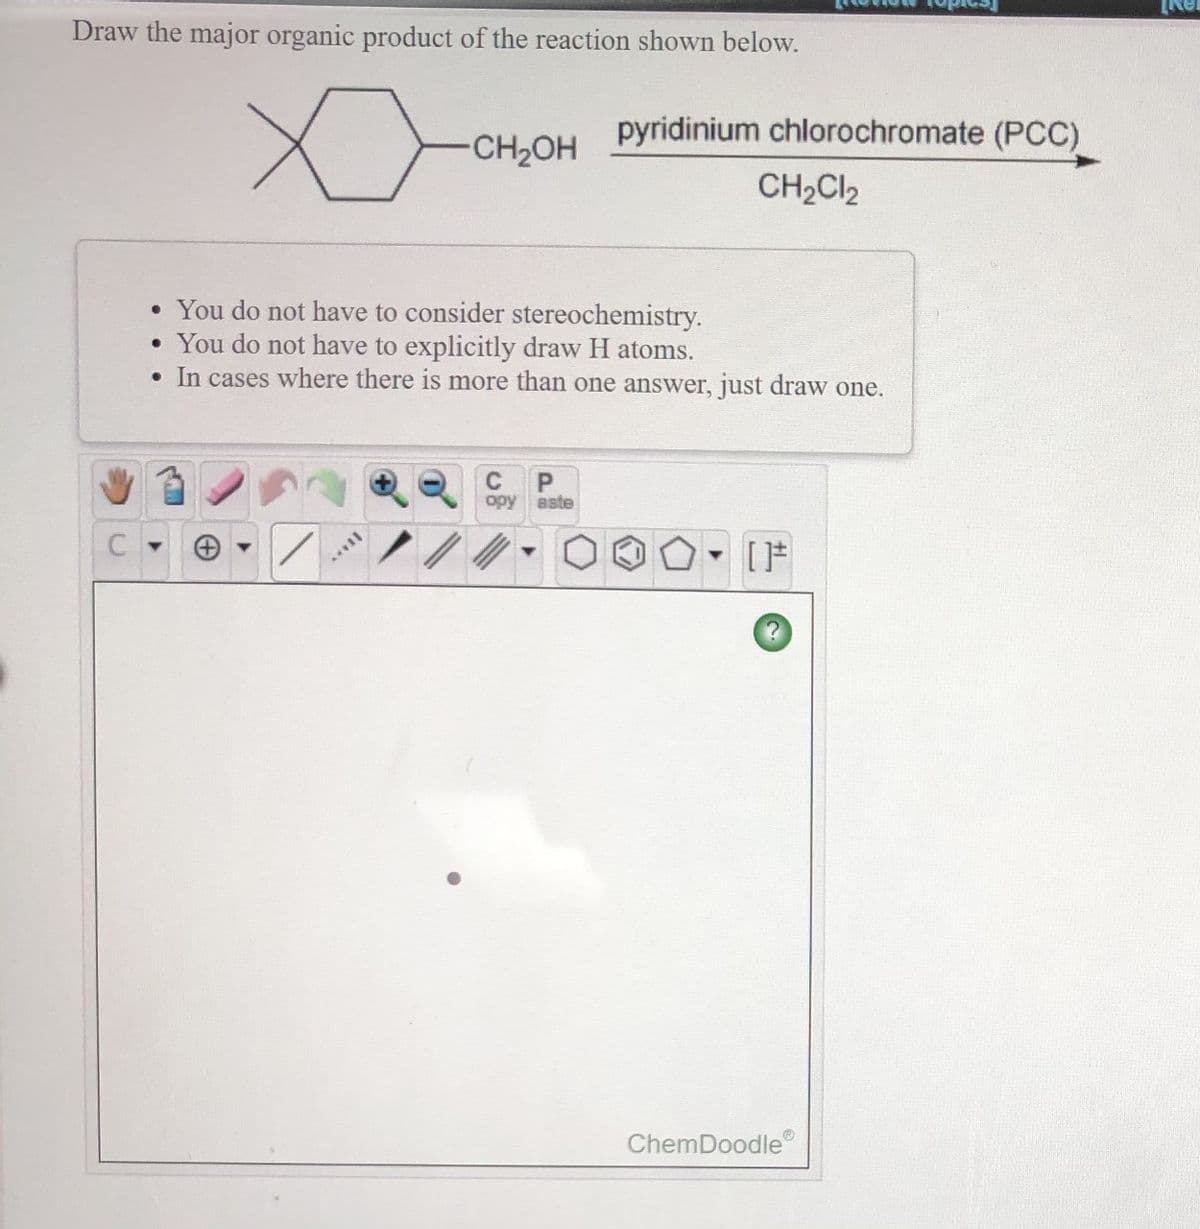 Draw the major organic product of the reaction shown below.
pyridinium chlorochromate (PCC)
-CH2OH
CH2CI2
• You do not have to consider stereochemistry.
• You do not have to explicitly draw H atoms.
• In cases where there is more than one answer, just draw one.
opy
aste
[F
ChemDoodle
